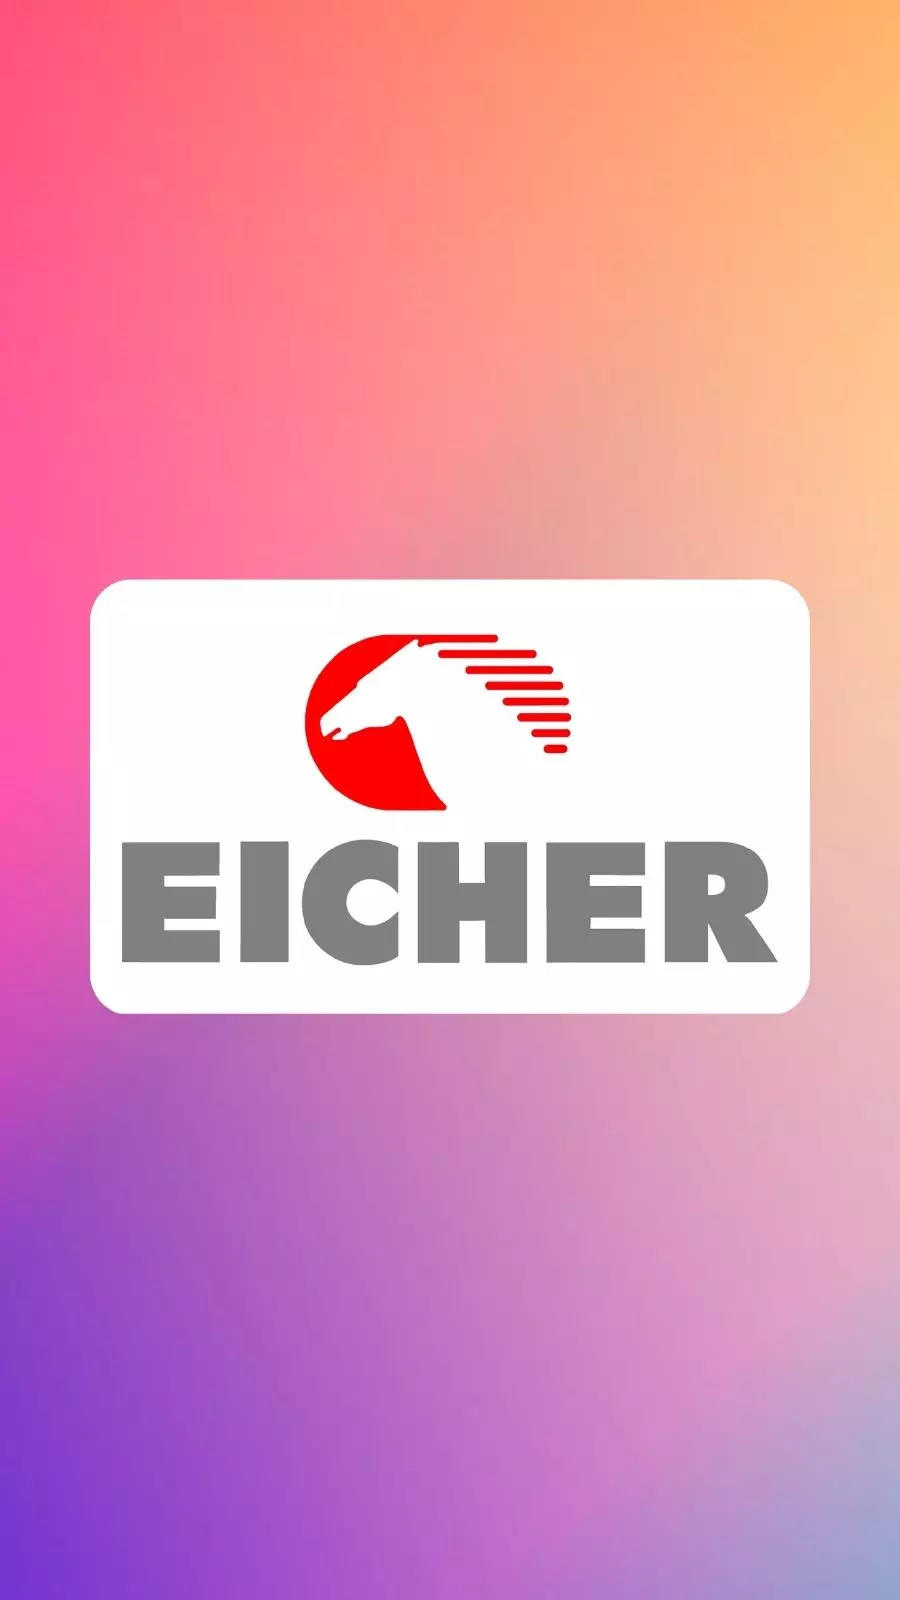 Eicher Motors Gets Rs 130 Cr Tax Demand Notices, Company To Challenge